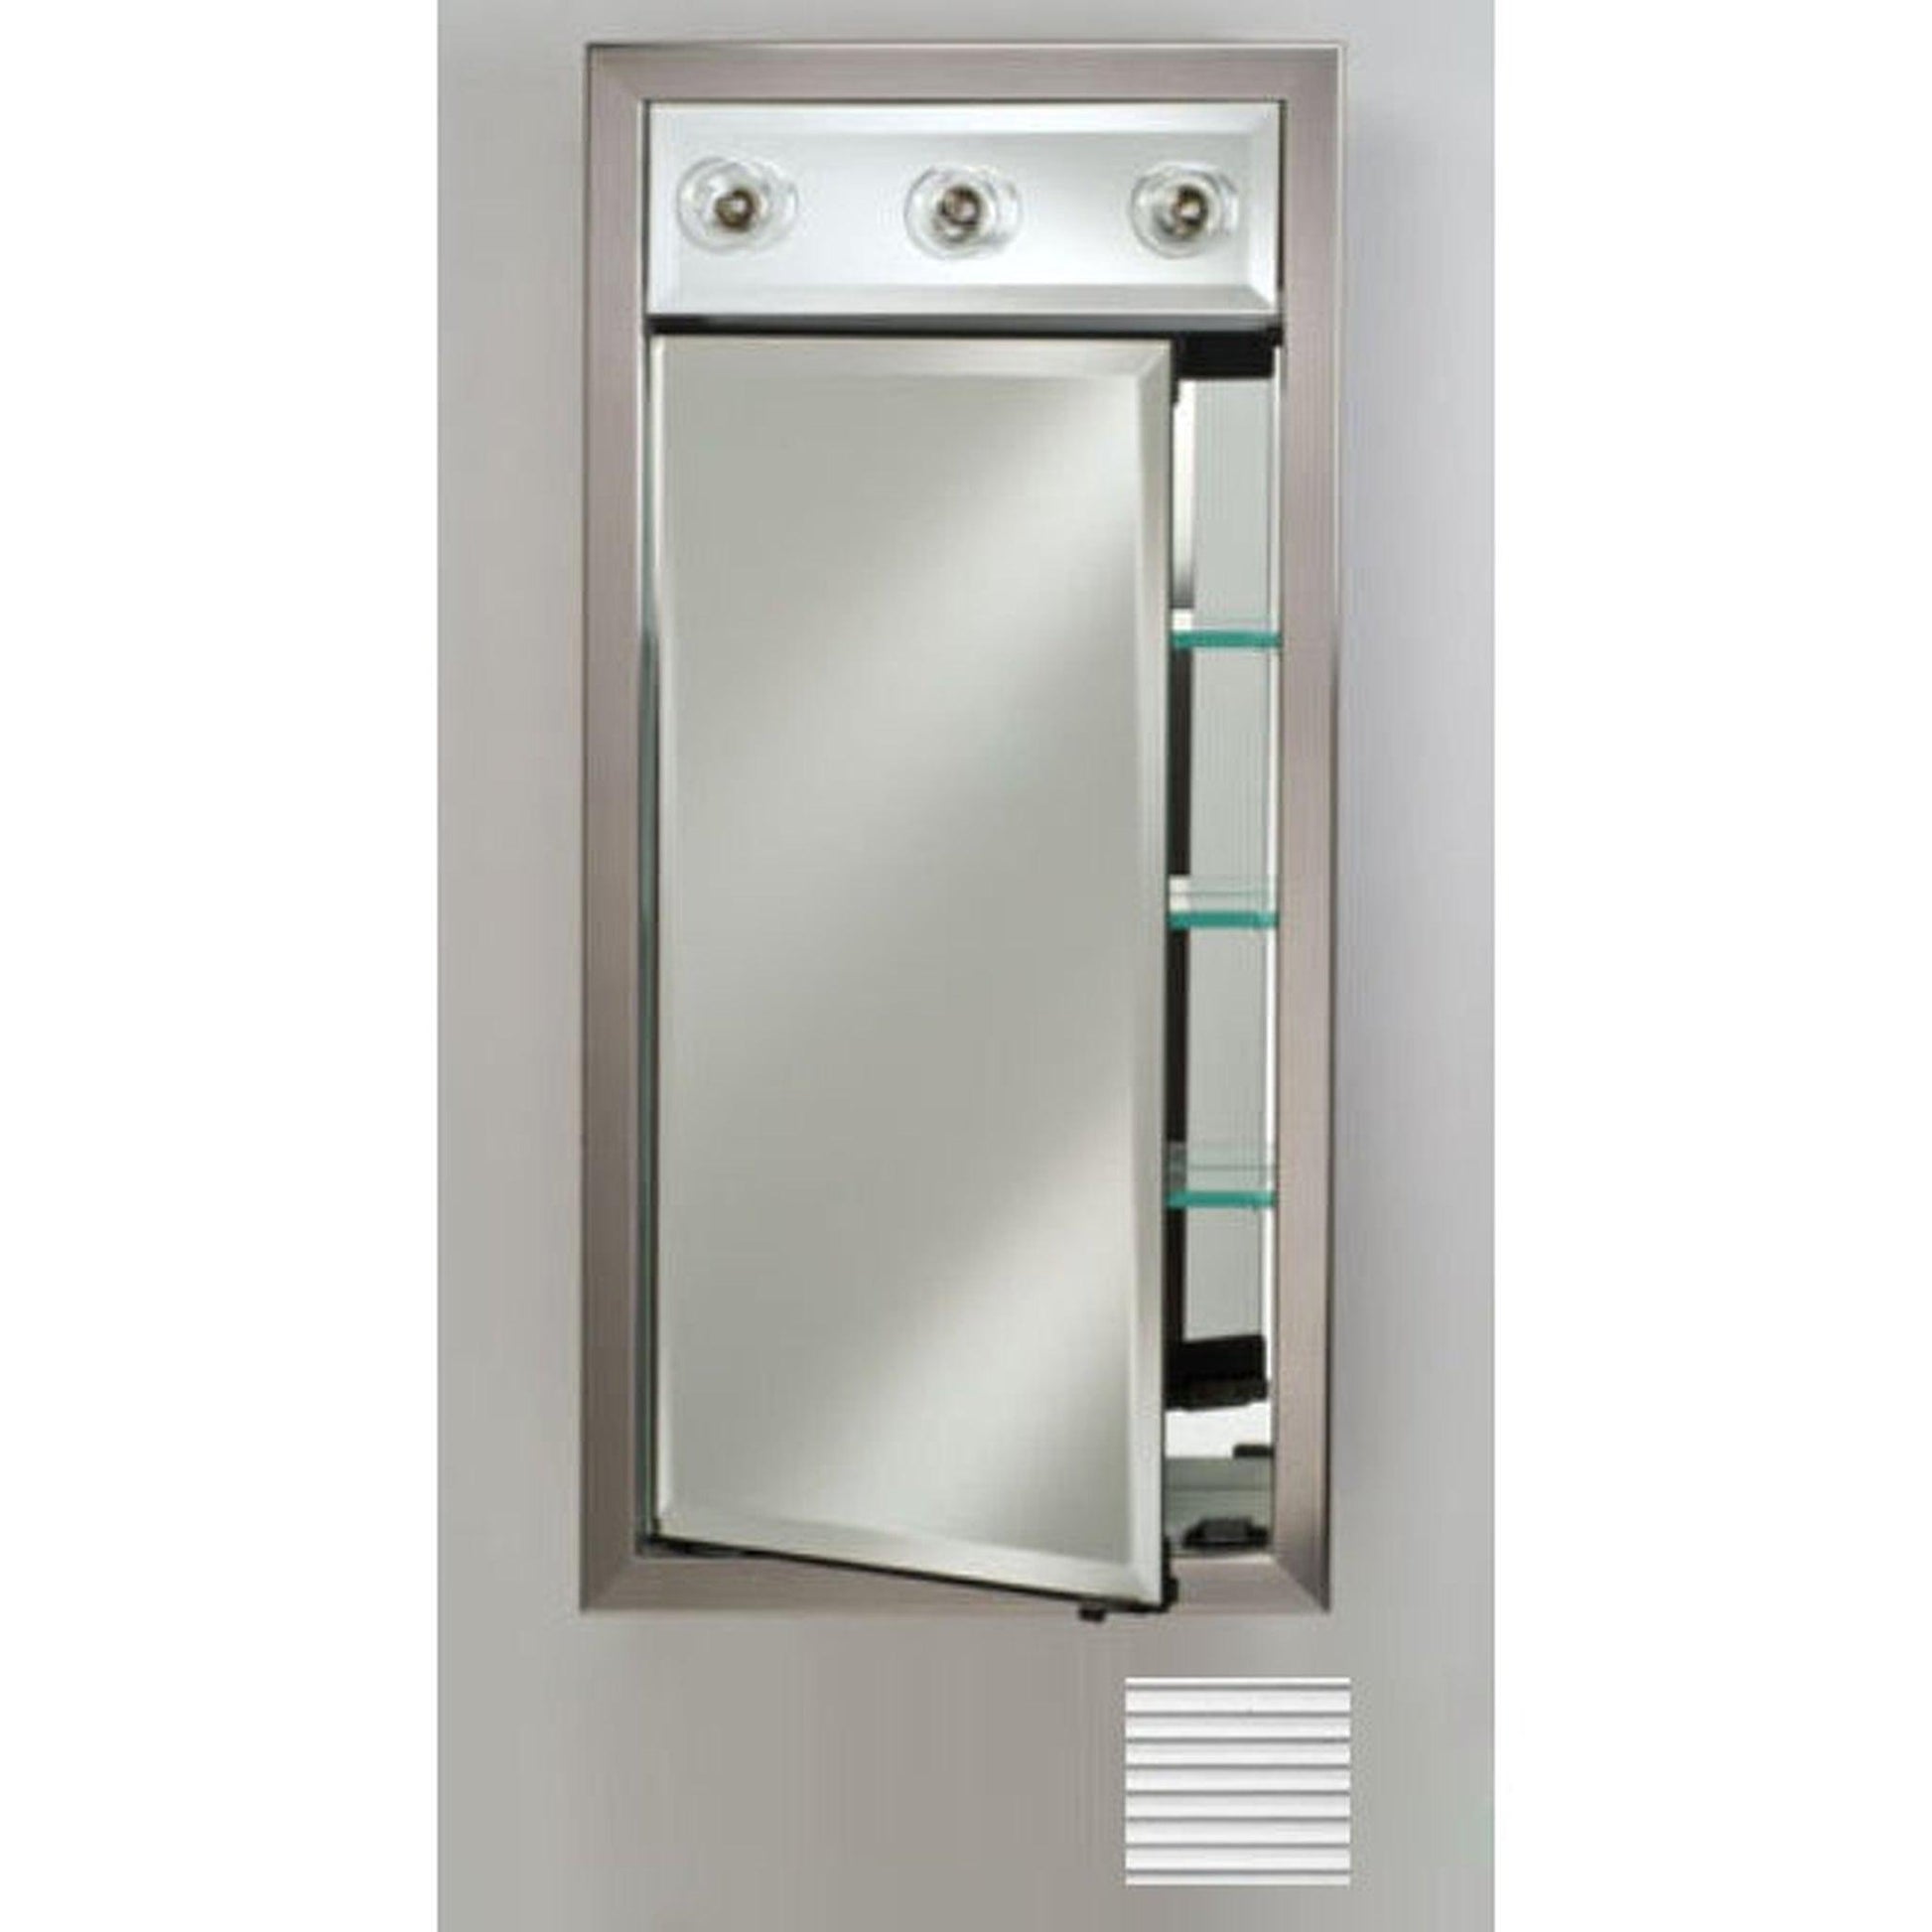 Afina Signature 17" x 40" Soho Fluted Chrome Recessed Left Hinged Single Door Medicine Cabinet With Contemporary Lights